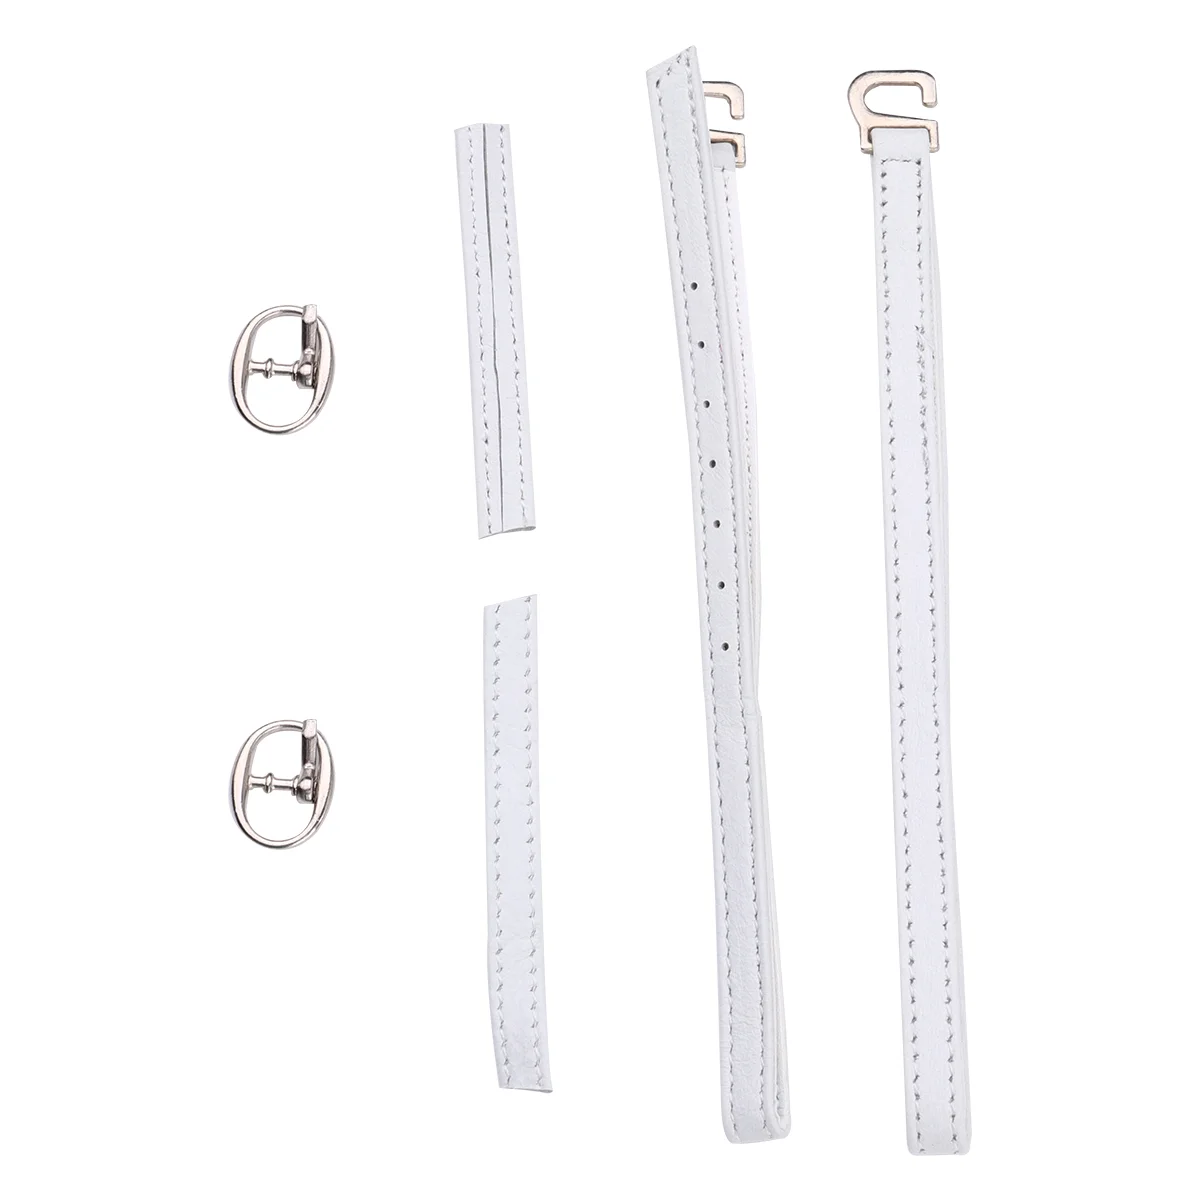 

White Stretchy Flexible Pu Lady High Heeled Shoe Bungee Shoe Laces Shoe Anti Shoe Straps with Buckle 2 Pairs